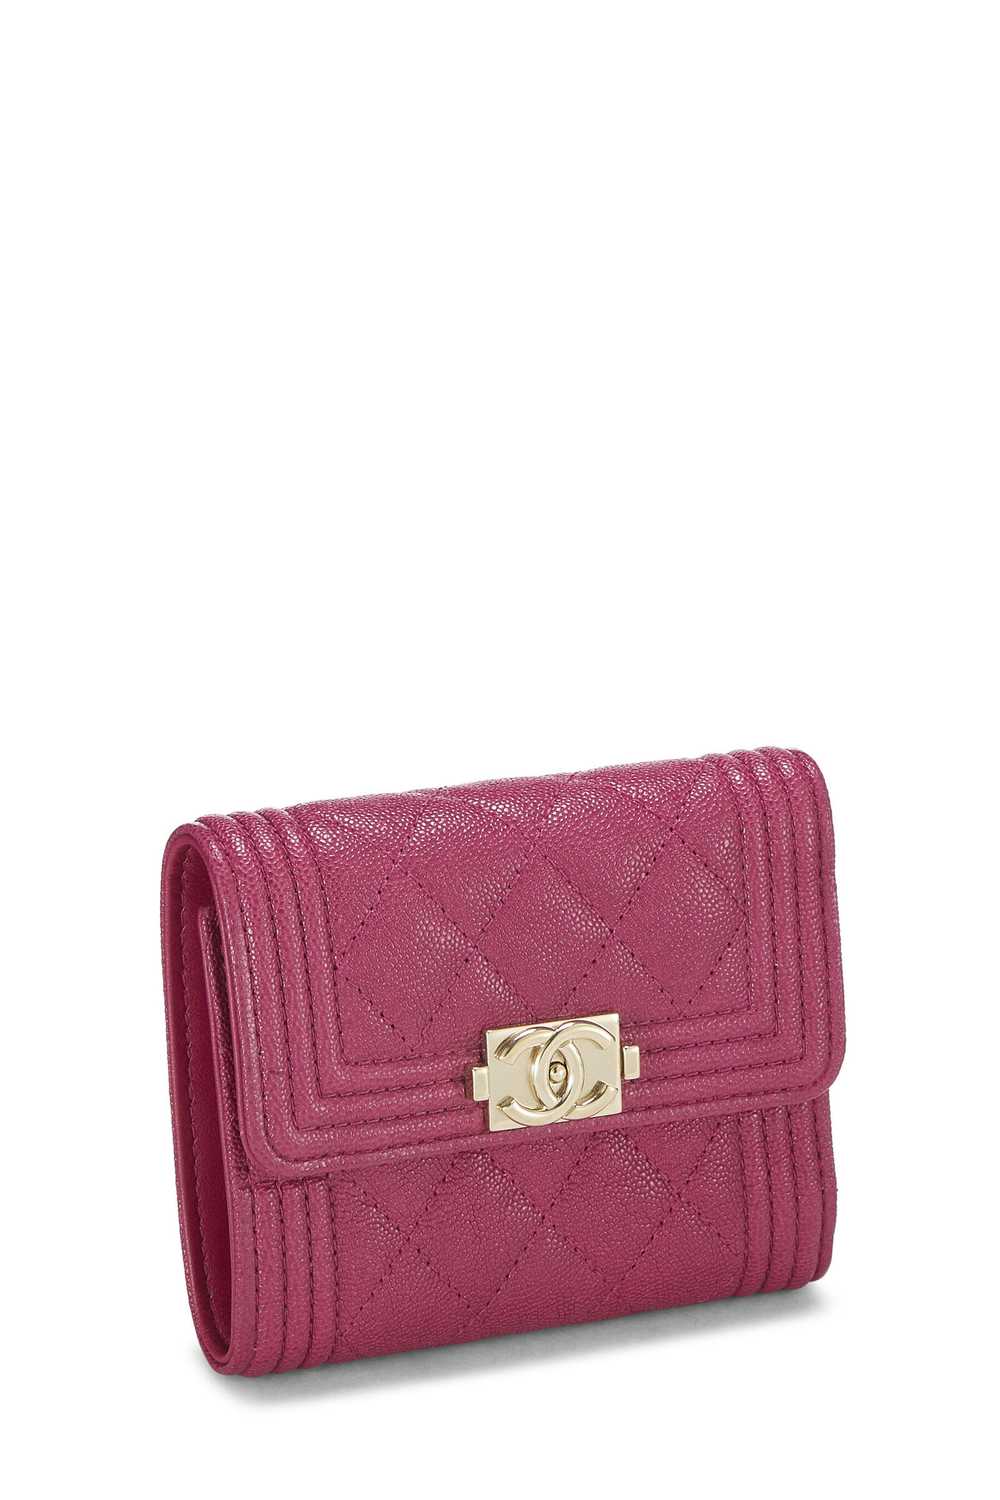 Purple Quilted Caviar Boy Compact Wallet - image 2